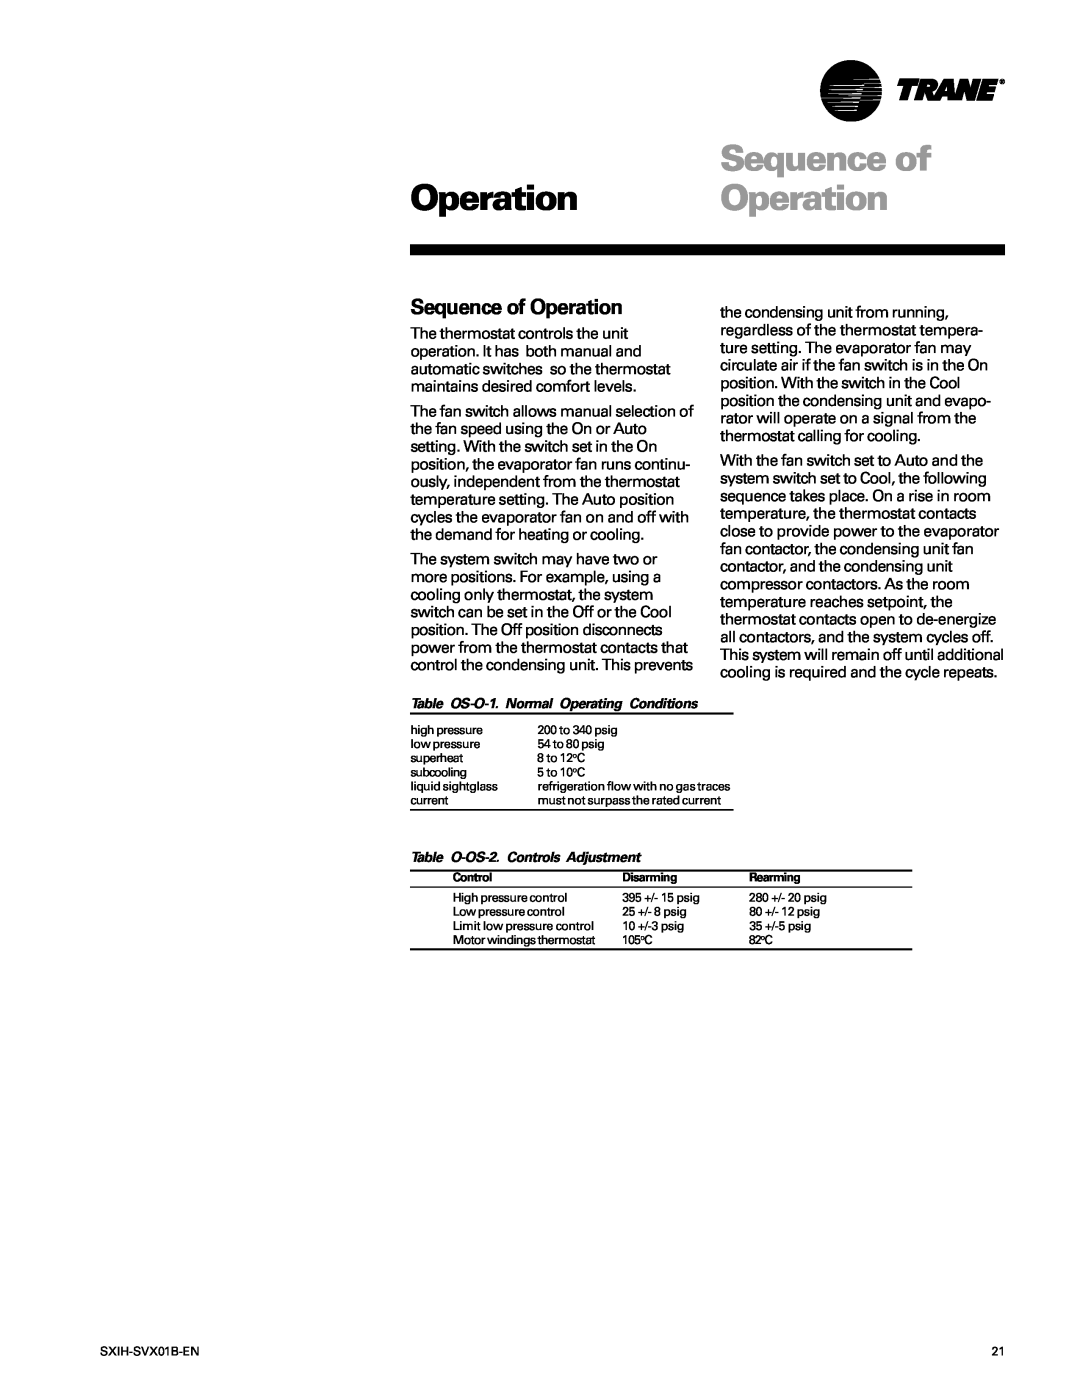 Trane SCIH manual Operation Operation, Sequence of Operation 